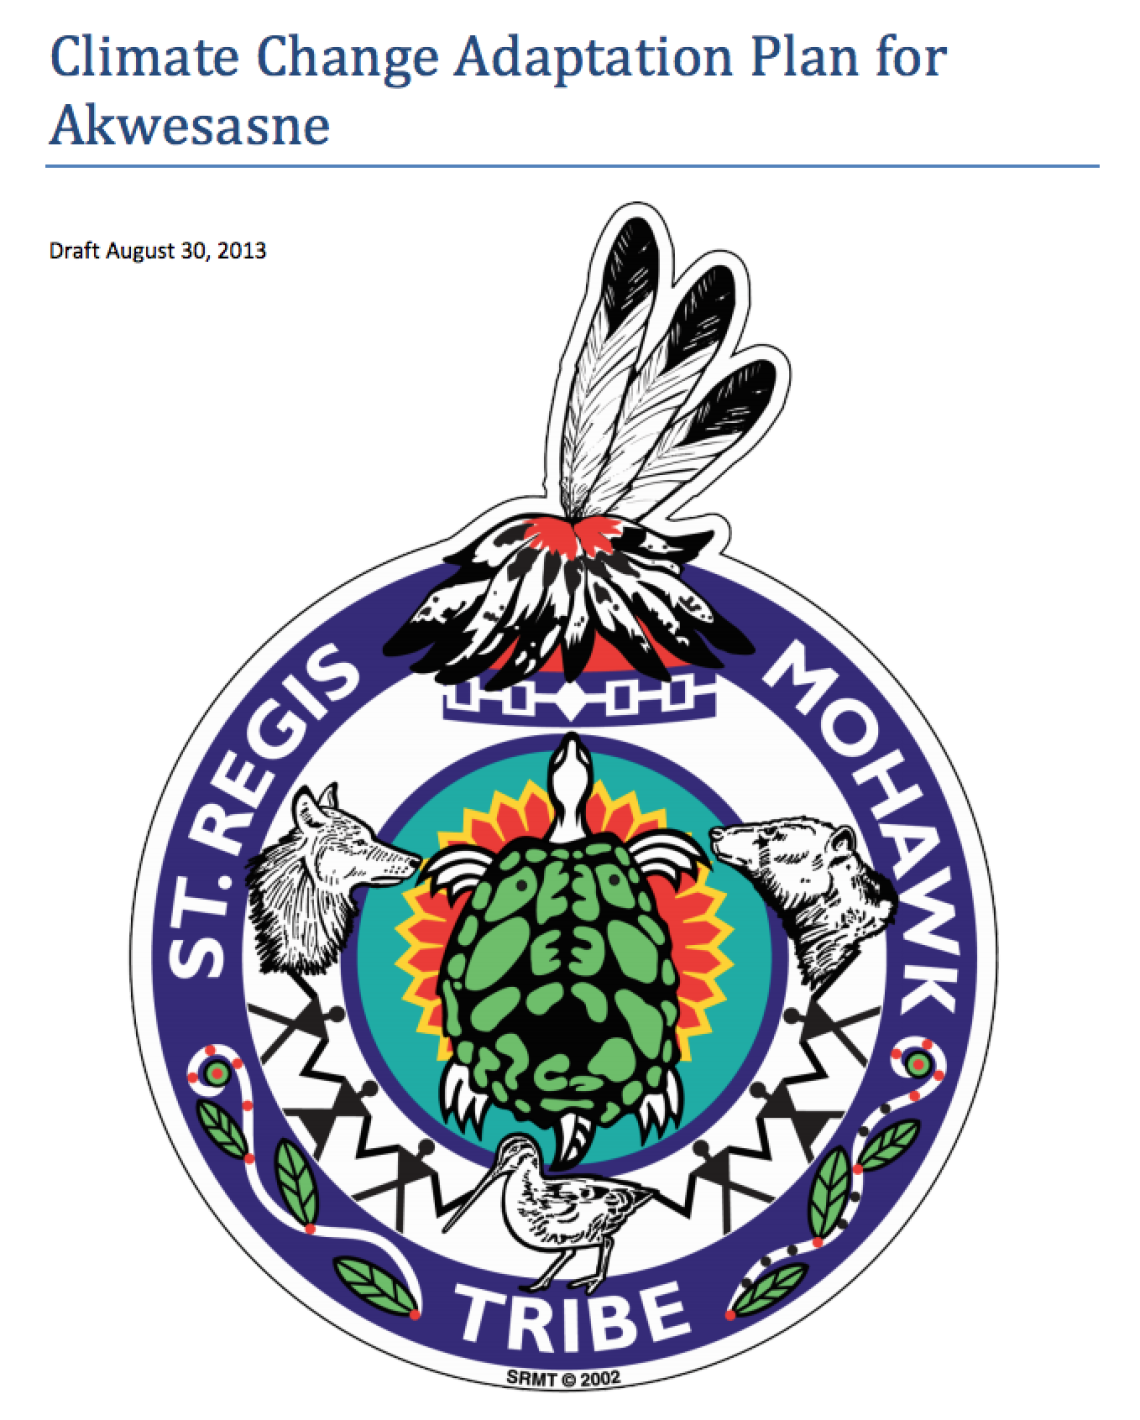 Saint Regis Mohawk Tribe: Climate Change and Adaptation Planning for Haudenosaunee Tribes